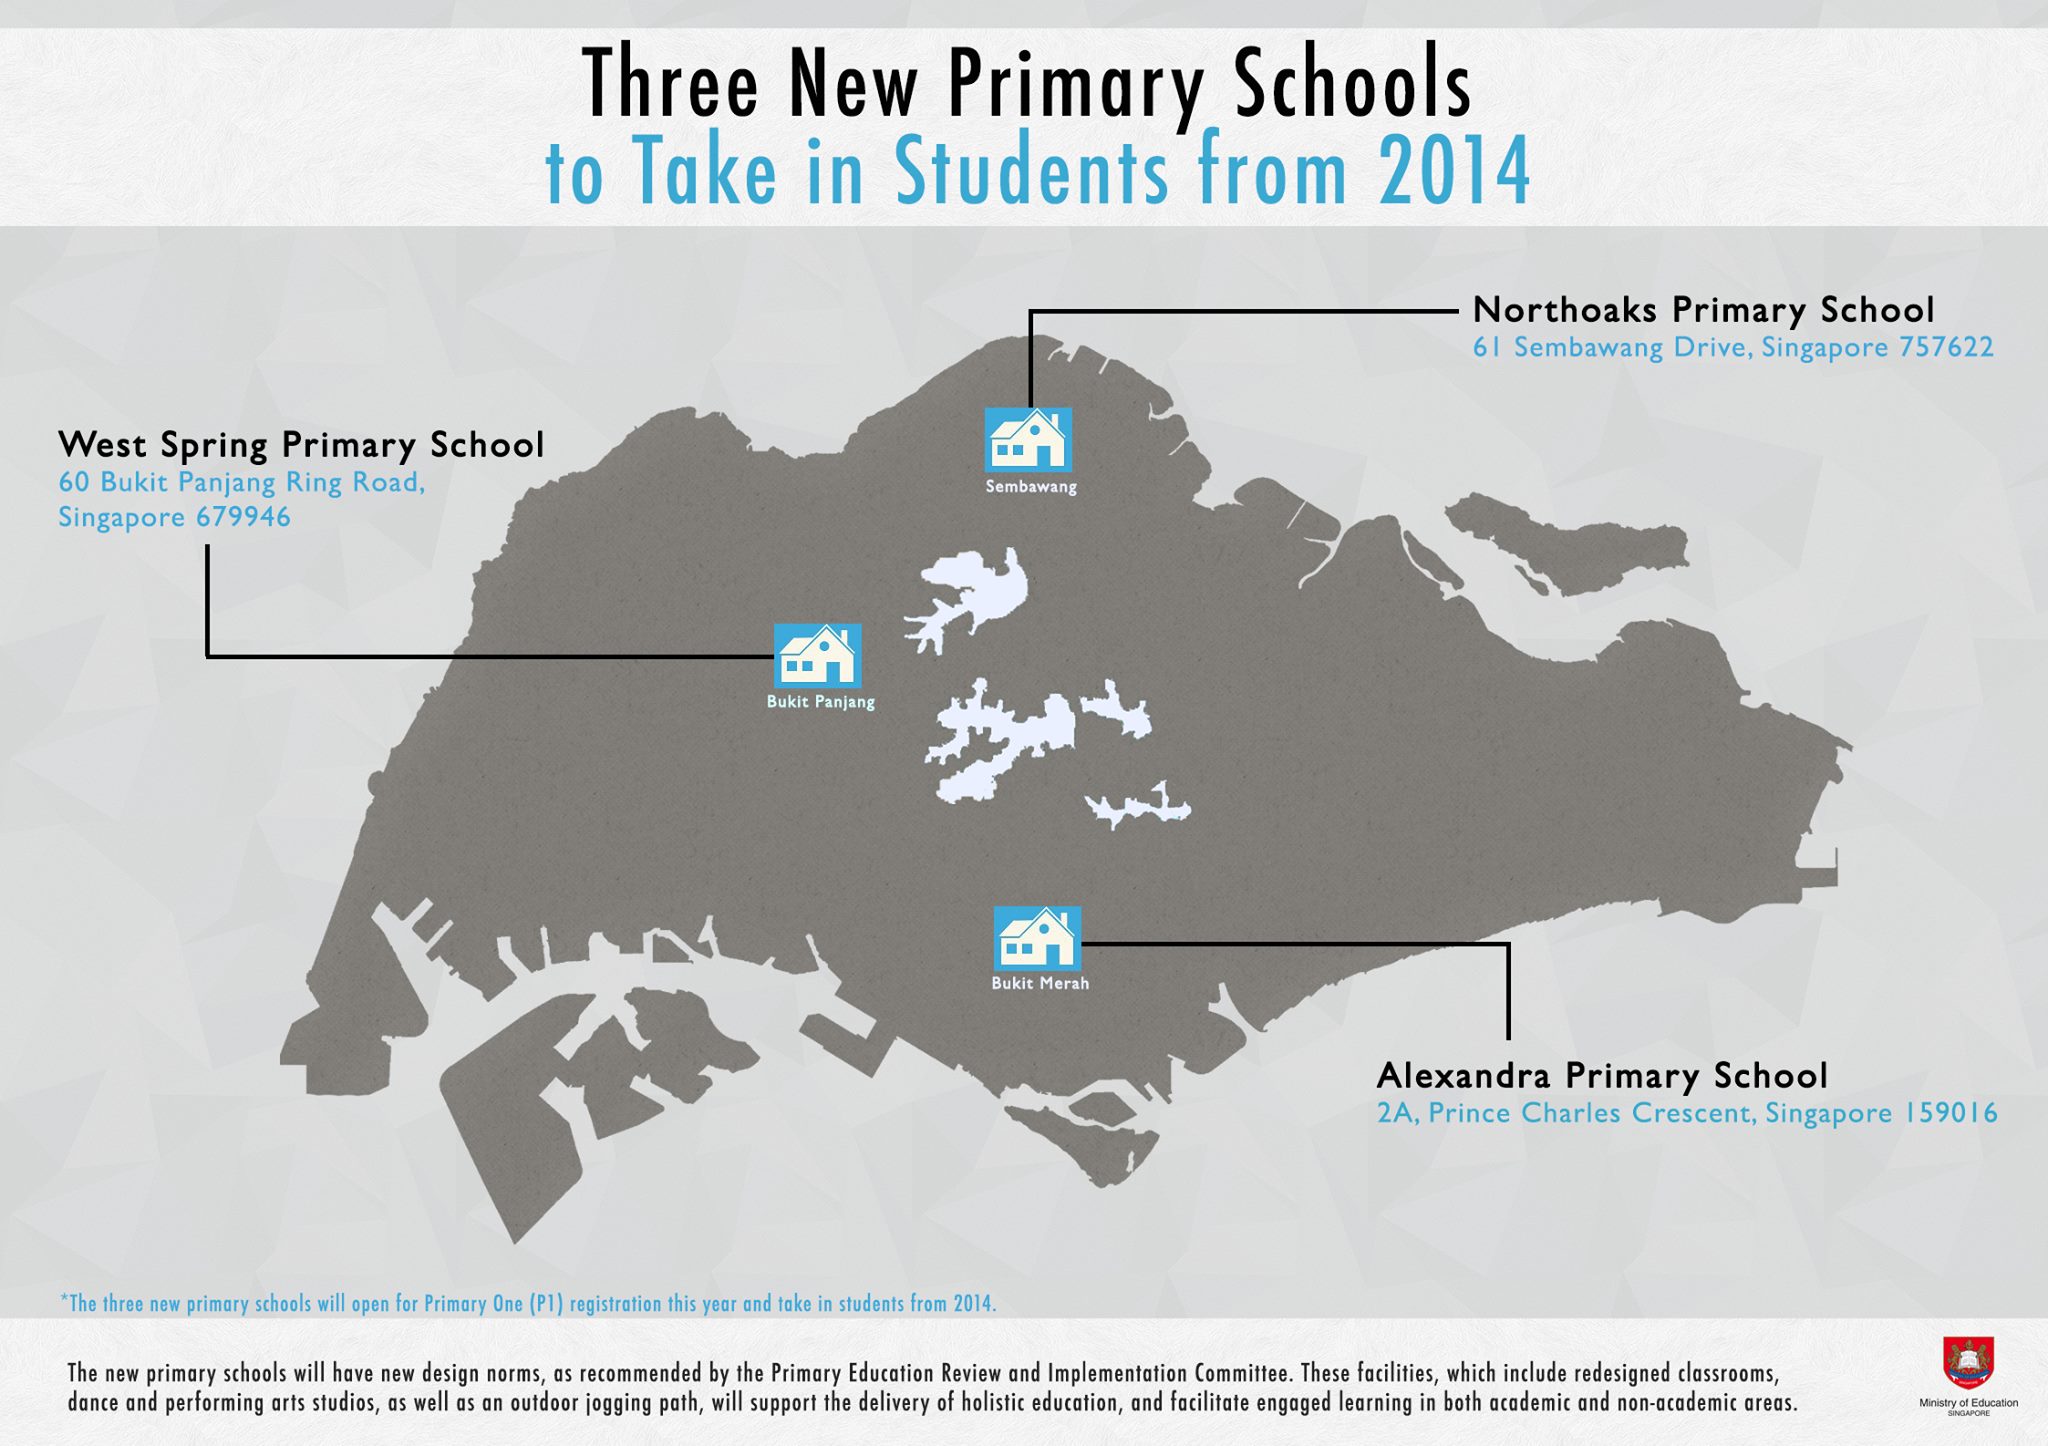 Three New Primary Schools to take in Students from 2014